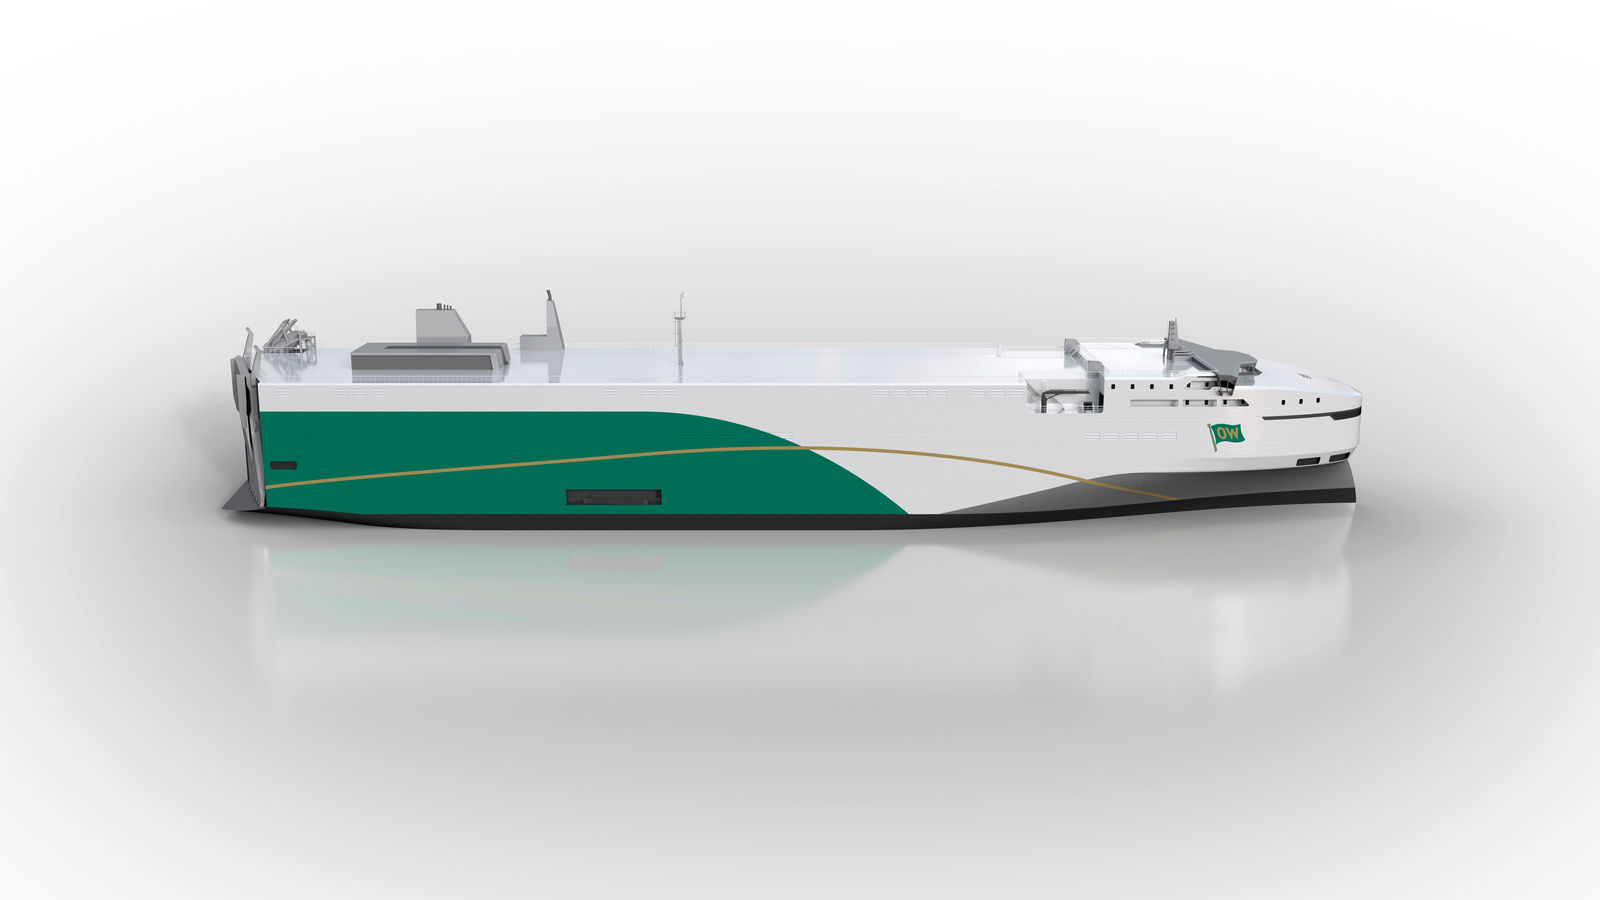 Volkswagen Group continues switch to low-emission logistics with LNG ships